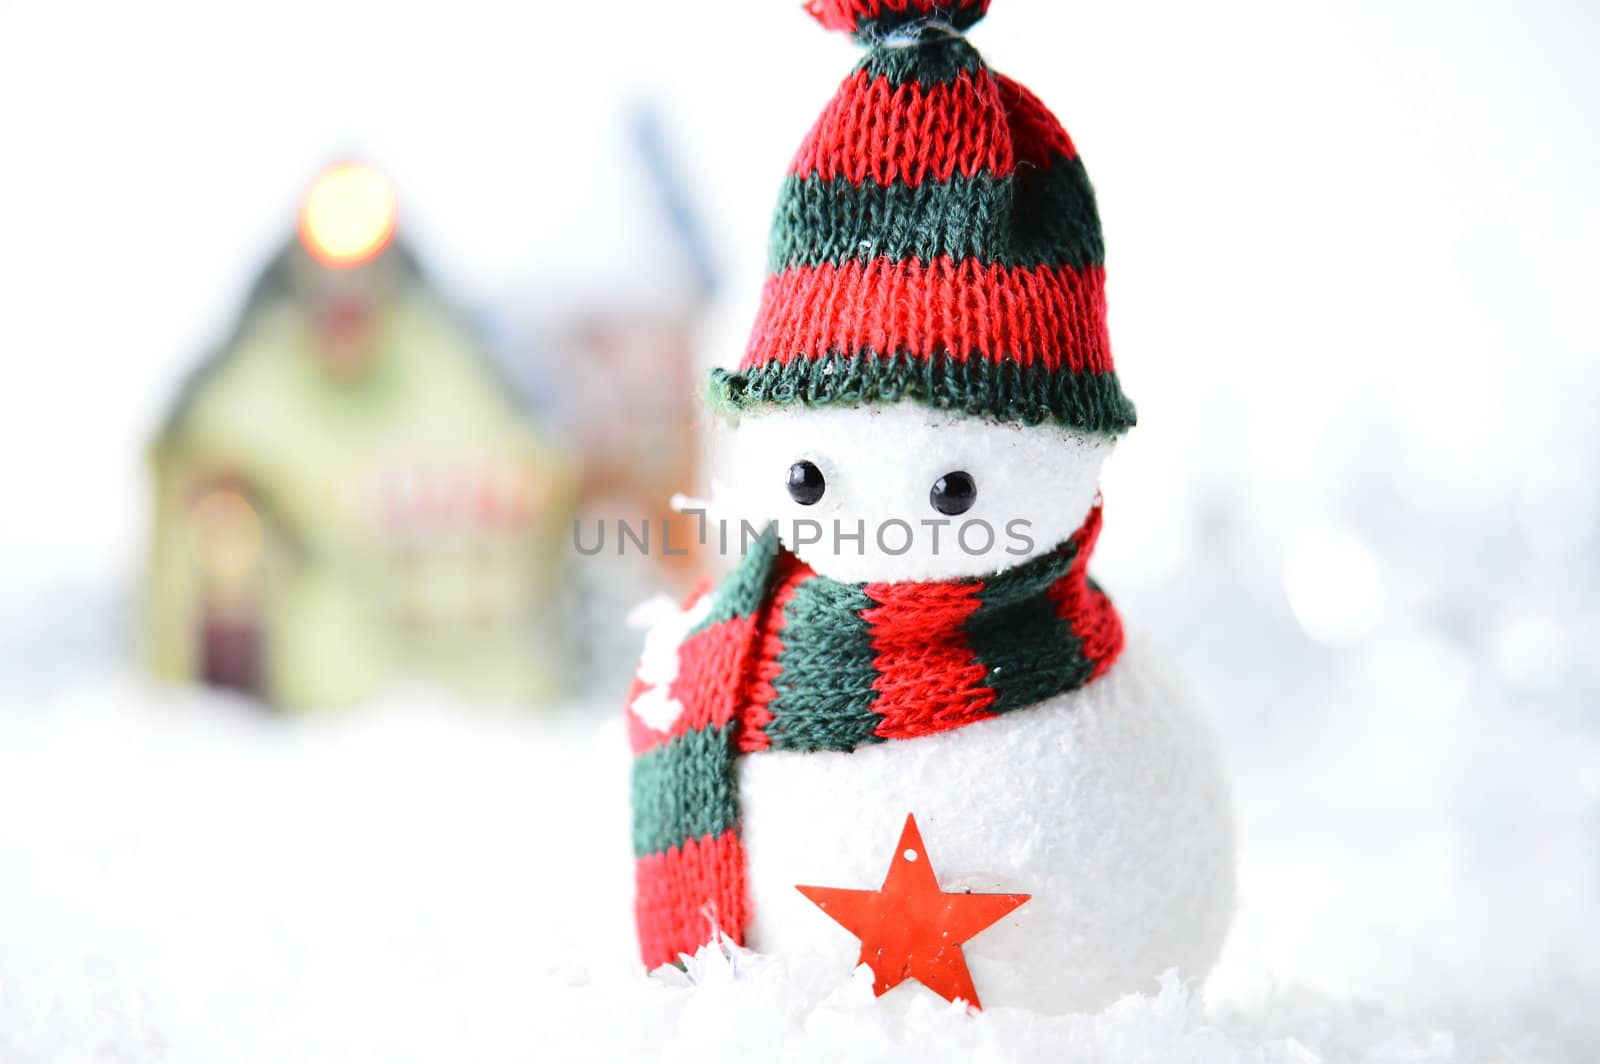 snowman with black and red hat and scarf in artificial snow on white background